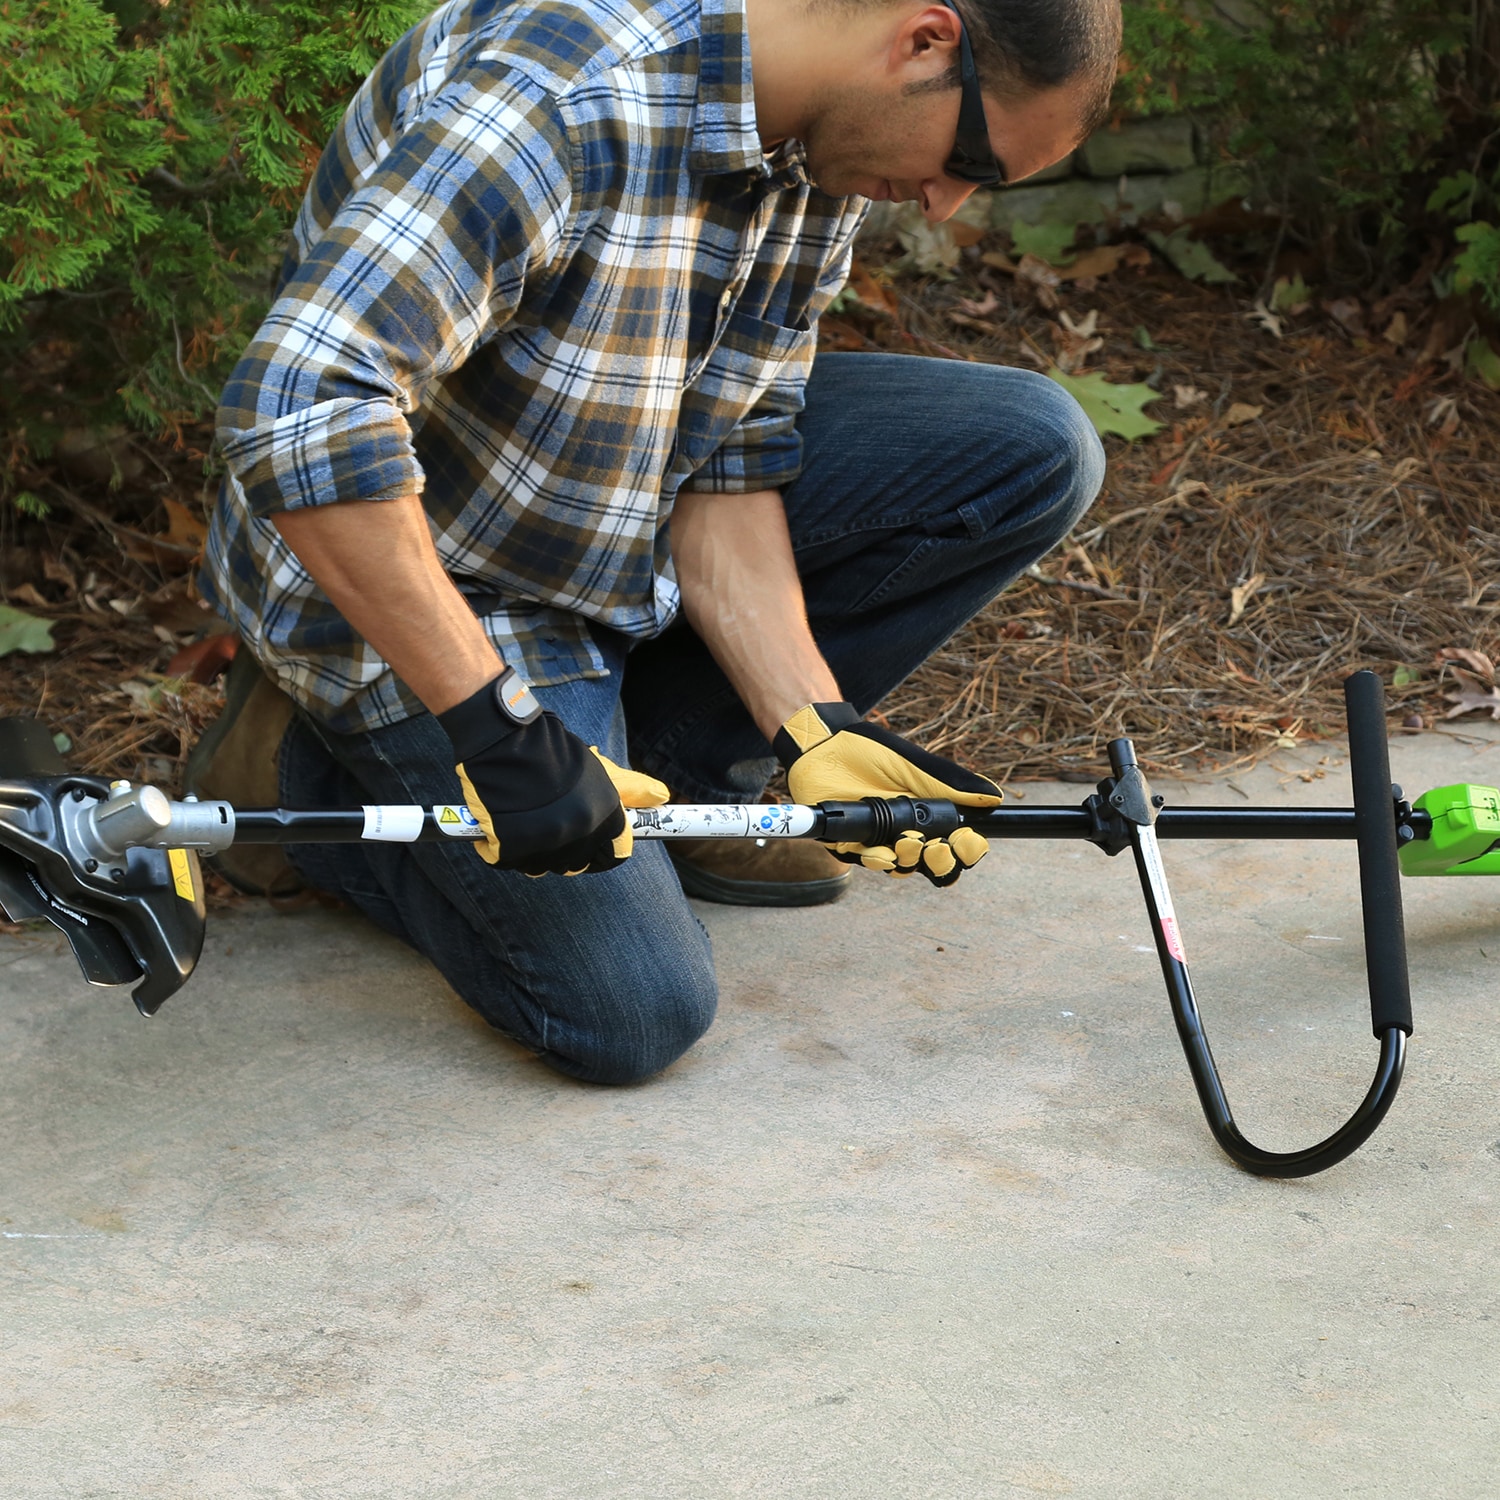 https://ak1.ostkcdn.com/images/products/9813124/GreenWorks-21362-G-MAX-40V-Digipro-14-Inch-String-Trimmer-with-4AH-Battery-and-Charger-Included-Attachment-Capable-13c5f628-cf96-48c6-9805-cd98542ba8d4.jpg